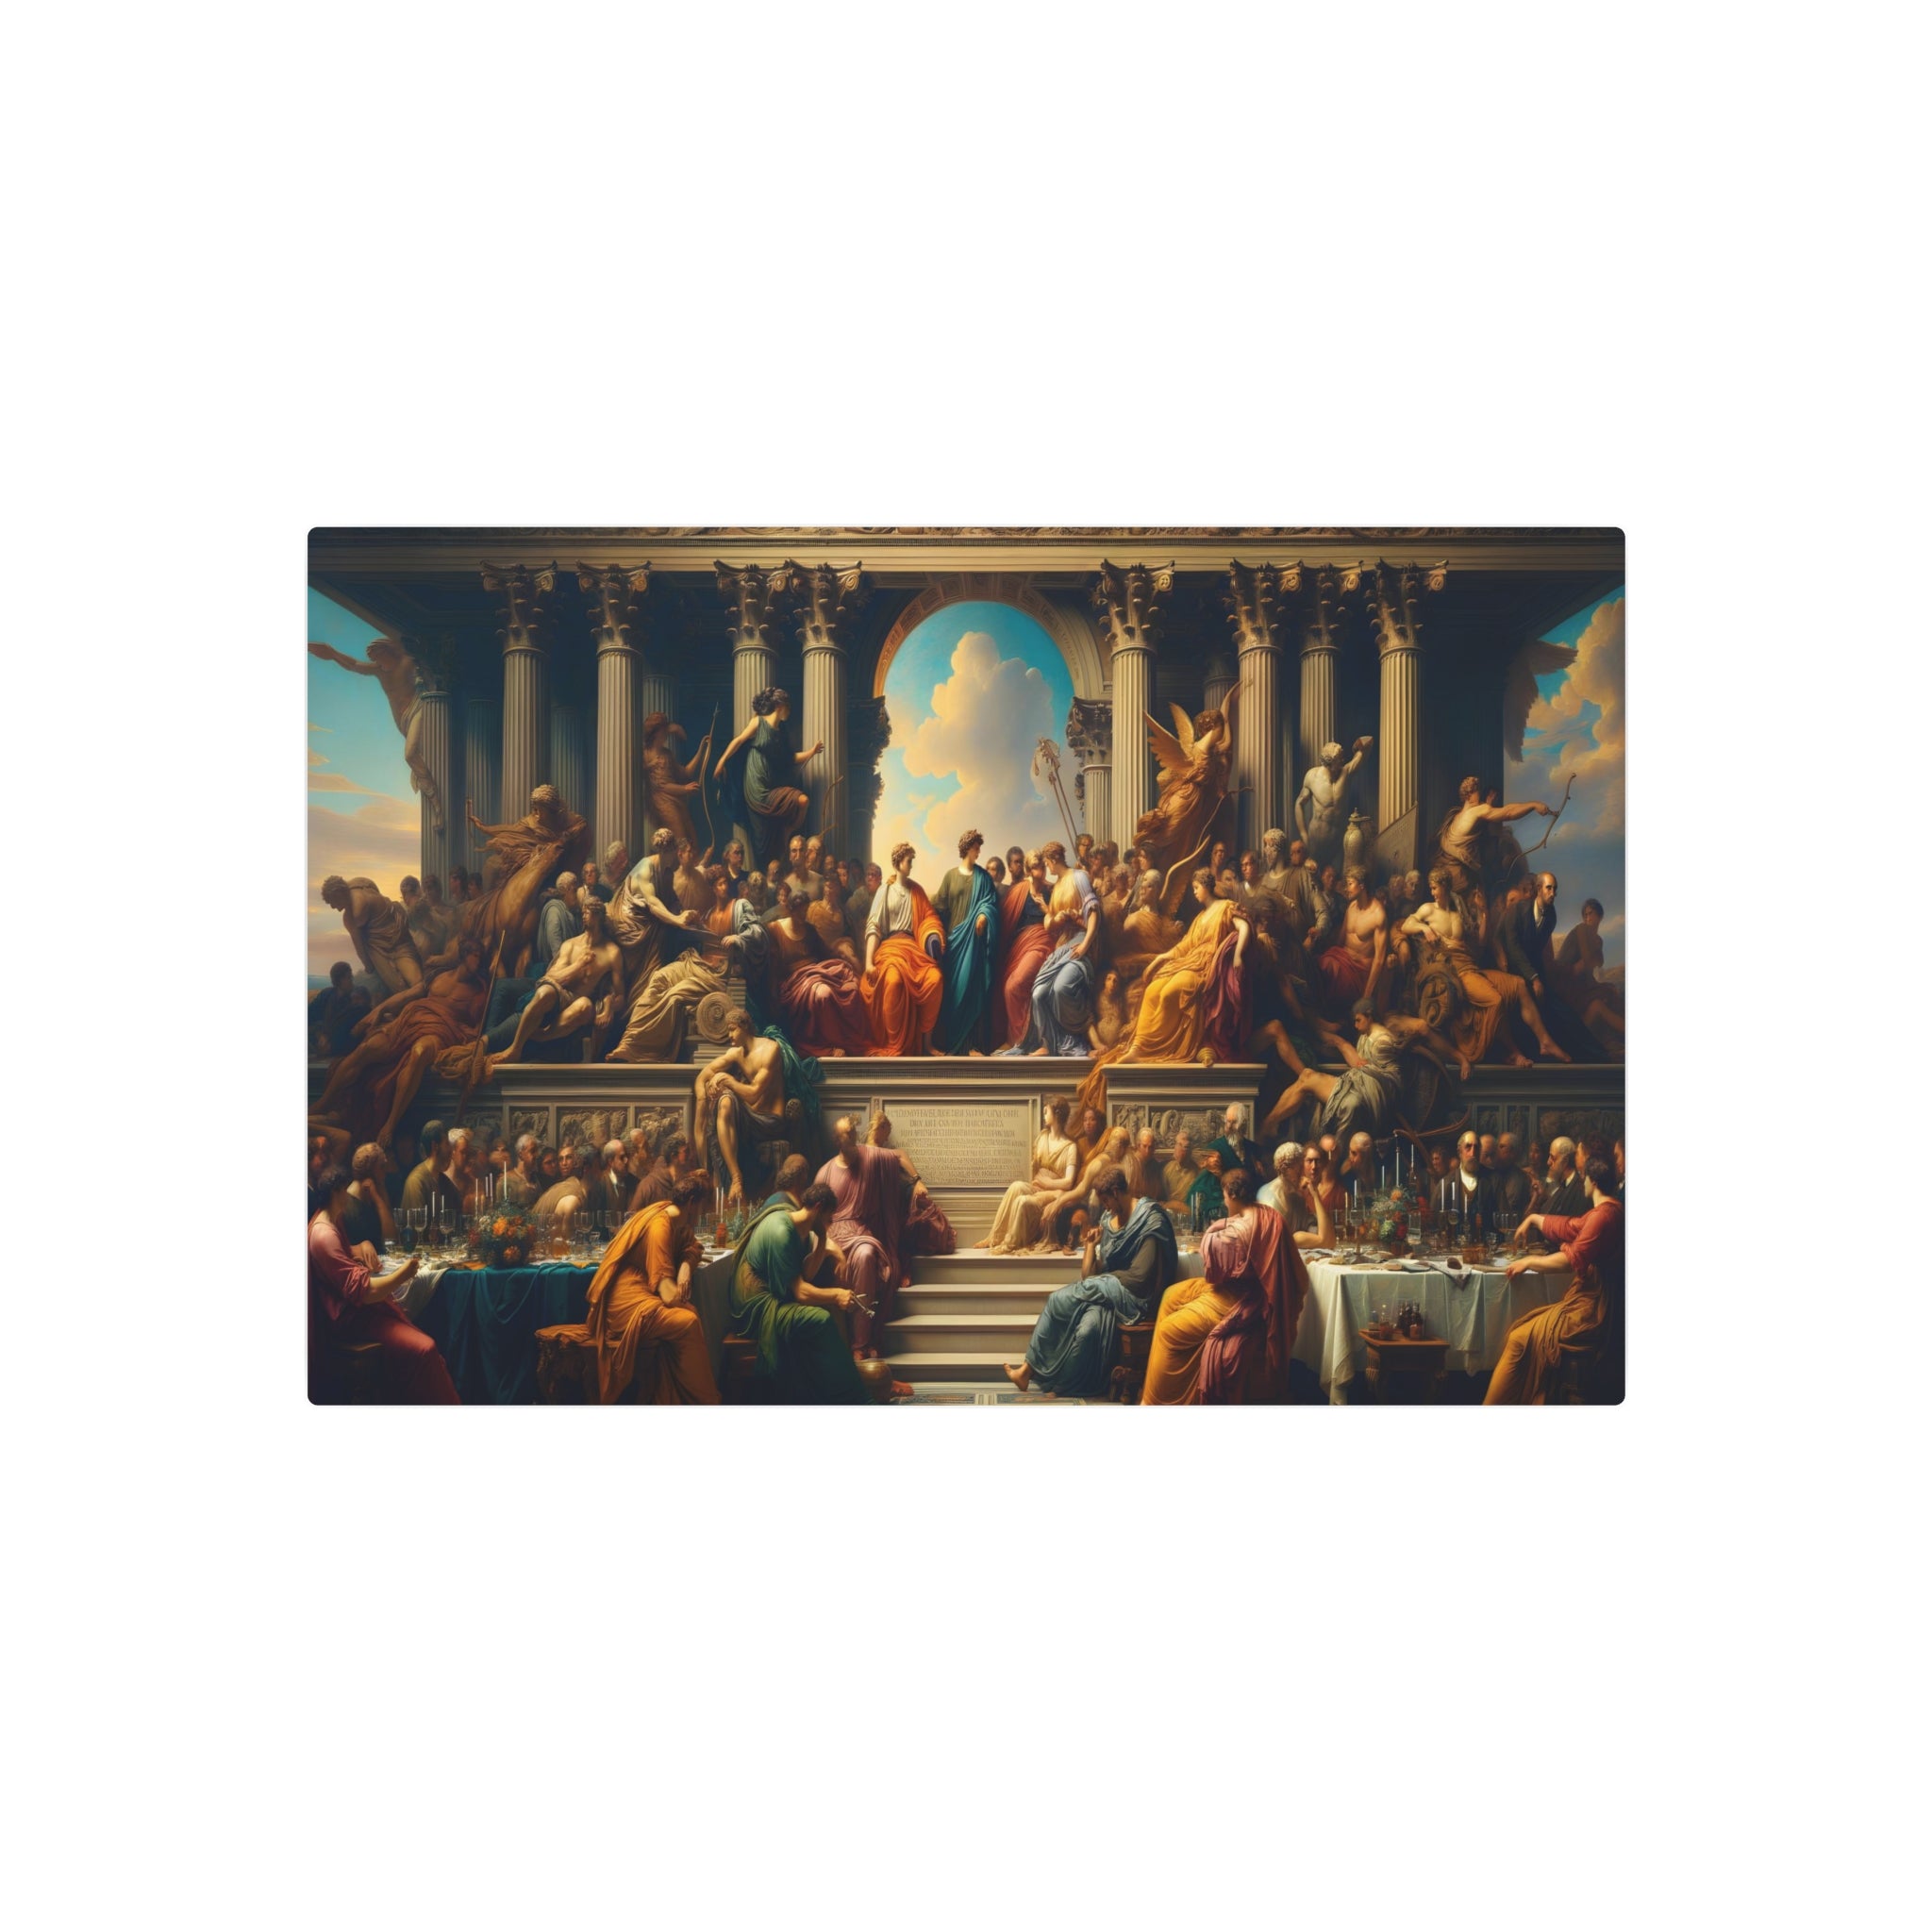 Metal Poster Art | "Neoclassicism Era Artwork - Balance, Harmony and Intricate Detailing in Western Art Styles"